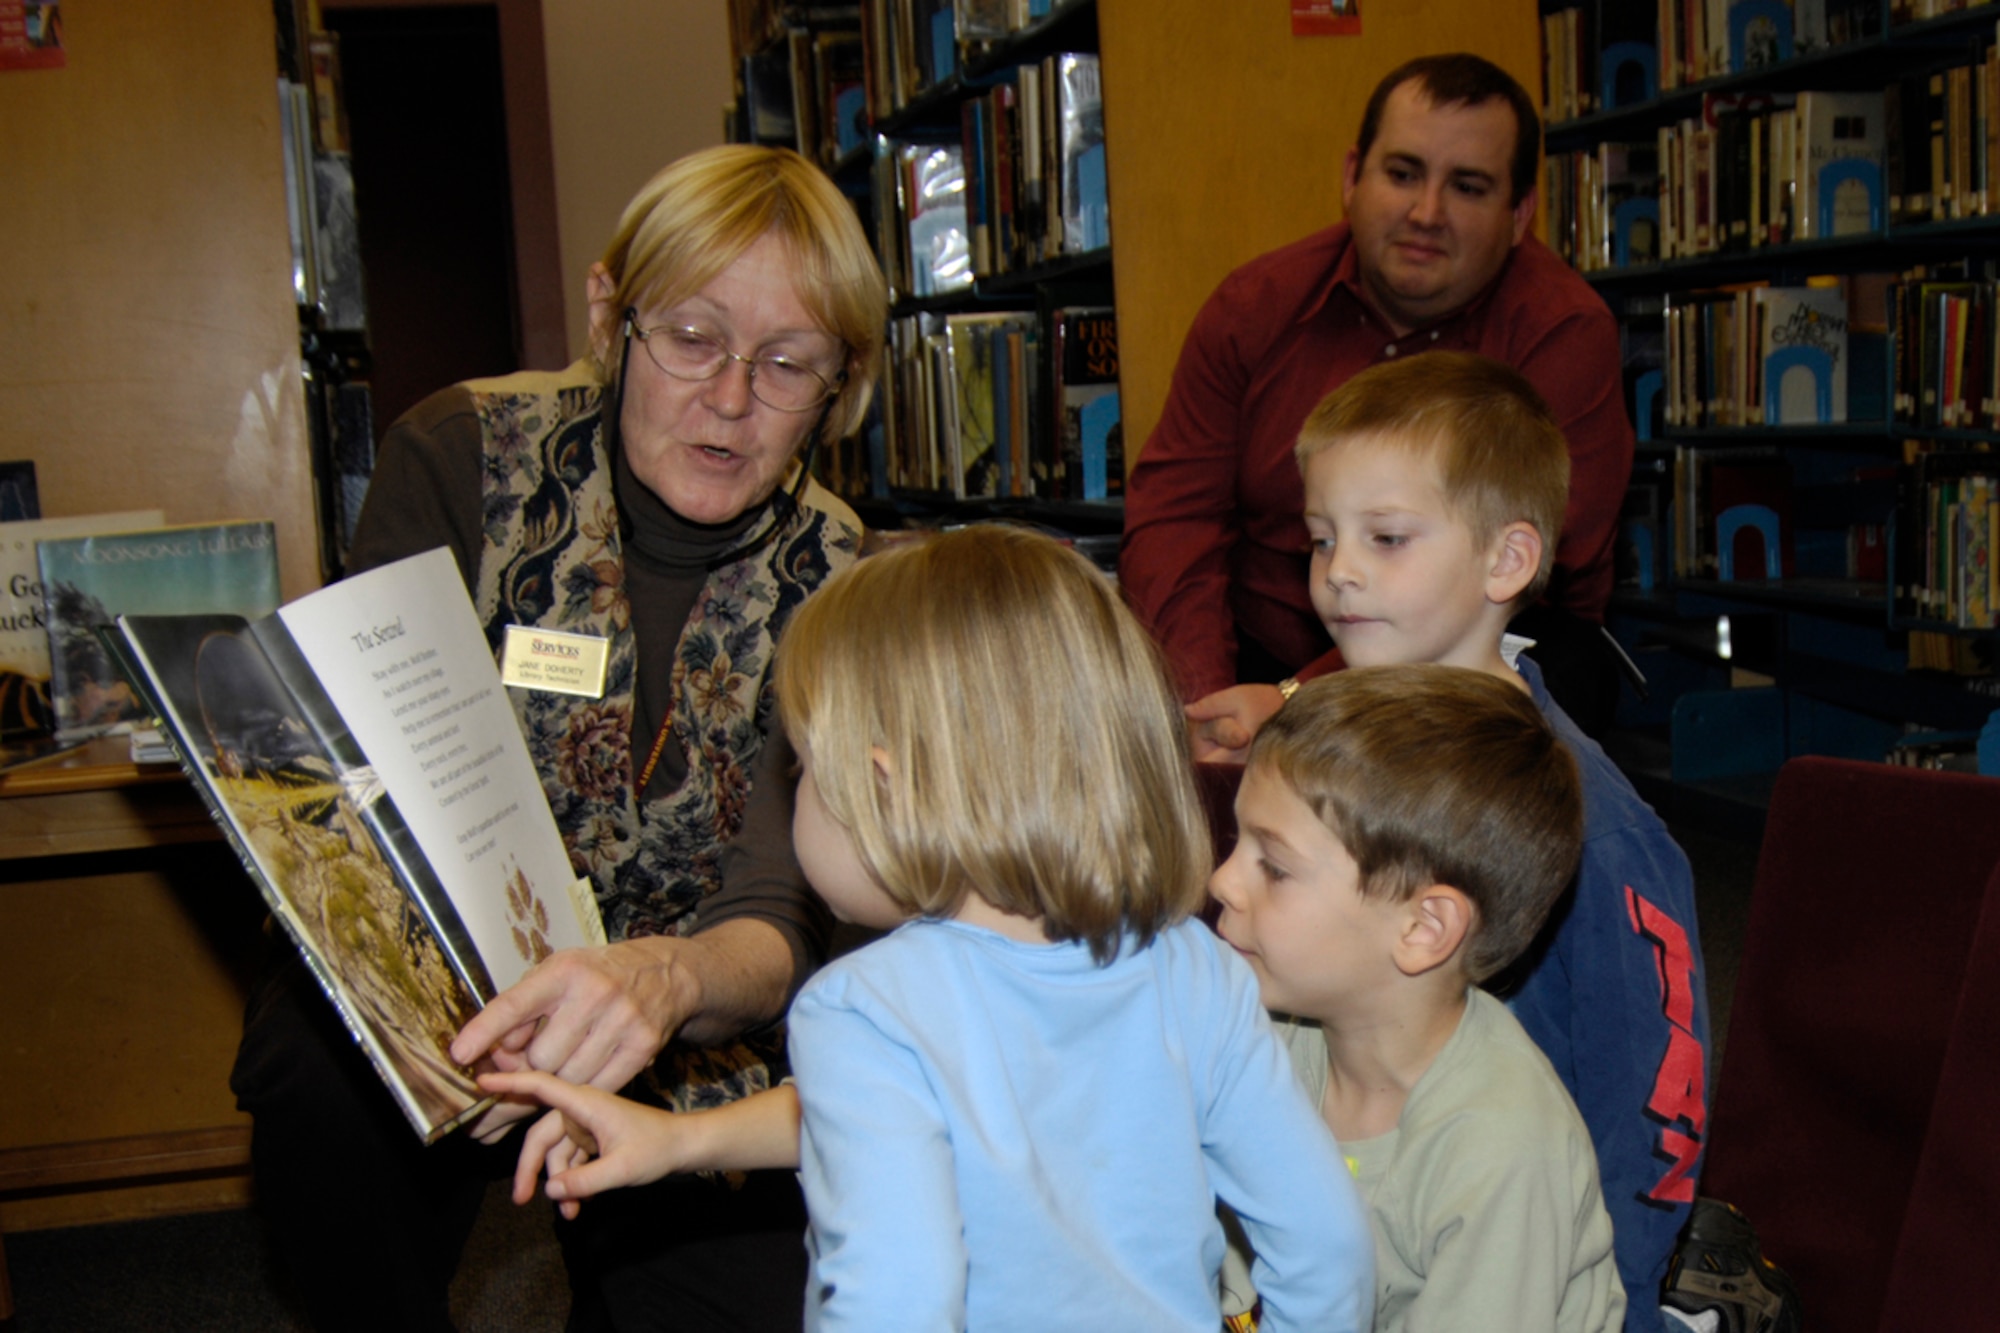 HANSCOM AIR FORCE Base -- Jane Doherty, Hanscom Library technician, reads the children’s book, “Brother Eagle, Sister Sky,” to Grace and Marshall Parish and Mitchell Wrisley during a Native American Story Telling session at the Base Library Nov. 14. The event was sponsored by the 551st Electronic Systems Wing to celebrate Native American Heritage Month, which is ongoing through November. On Nov. 28, “Indian Warriors – the Untold Story of the Civil War,” will be shown at the Base Theater at 11 a.m. For information on this event, contact Tom Arsenault at 781-377-8735. (U.S. Air Force photo by Linda LaBonte Britt)